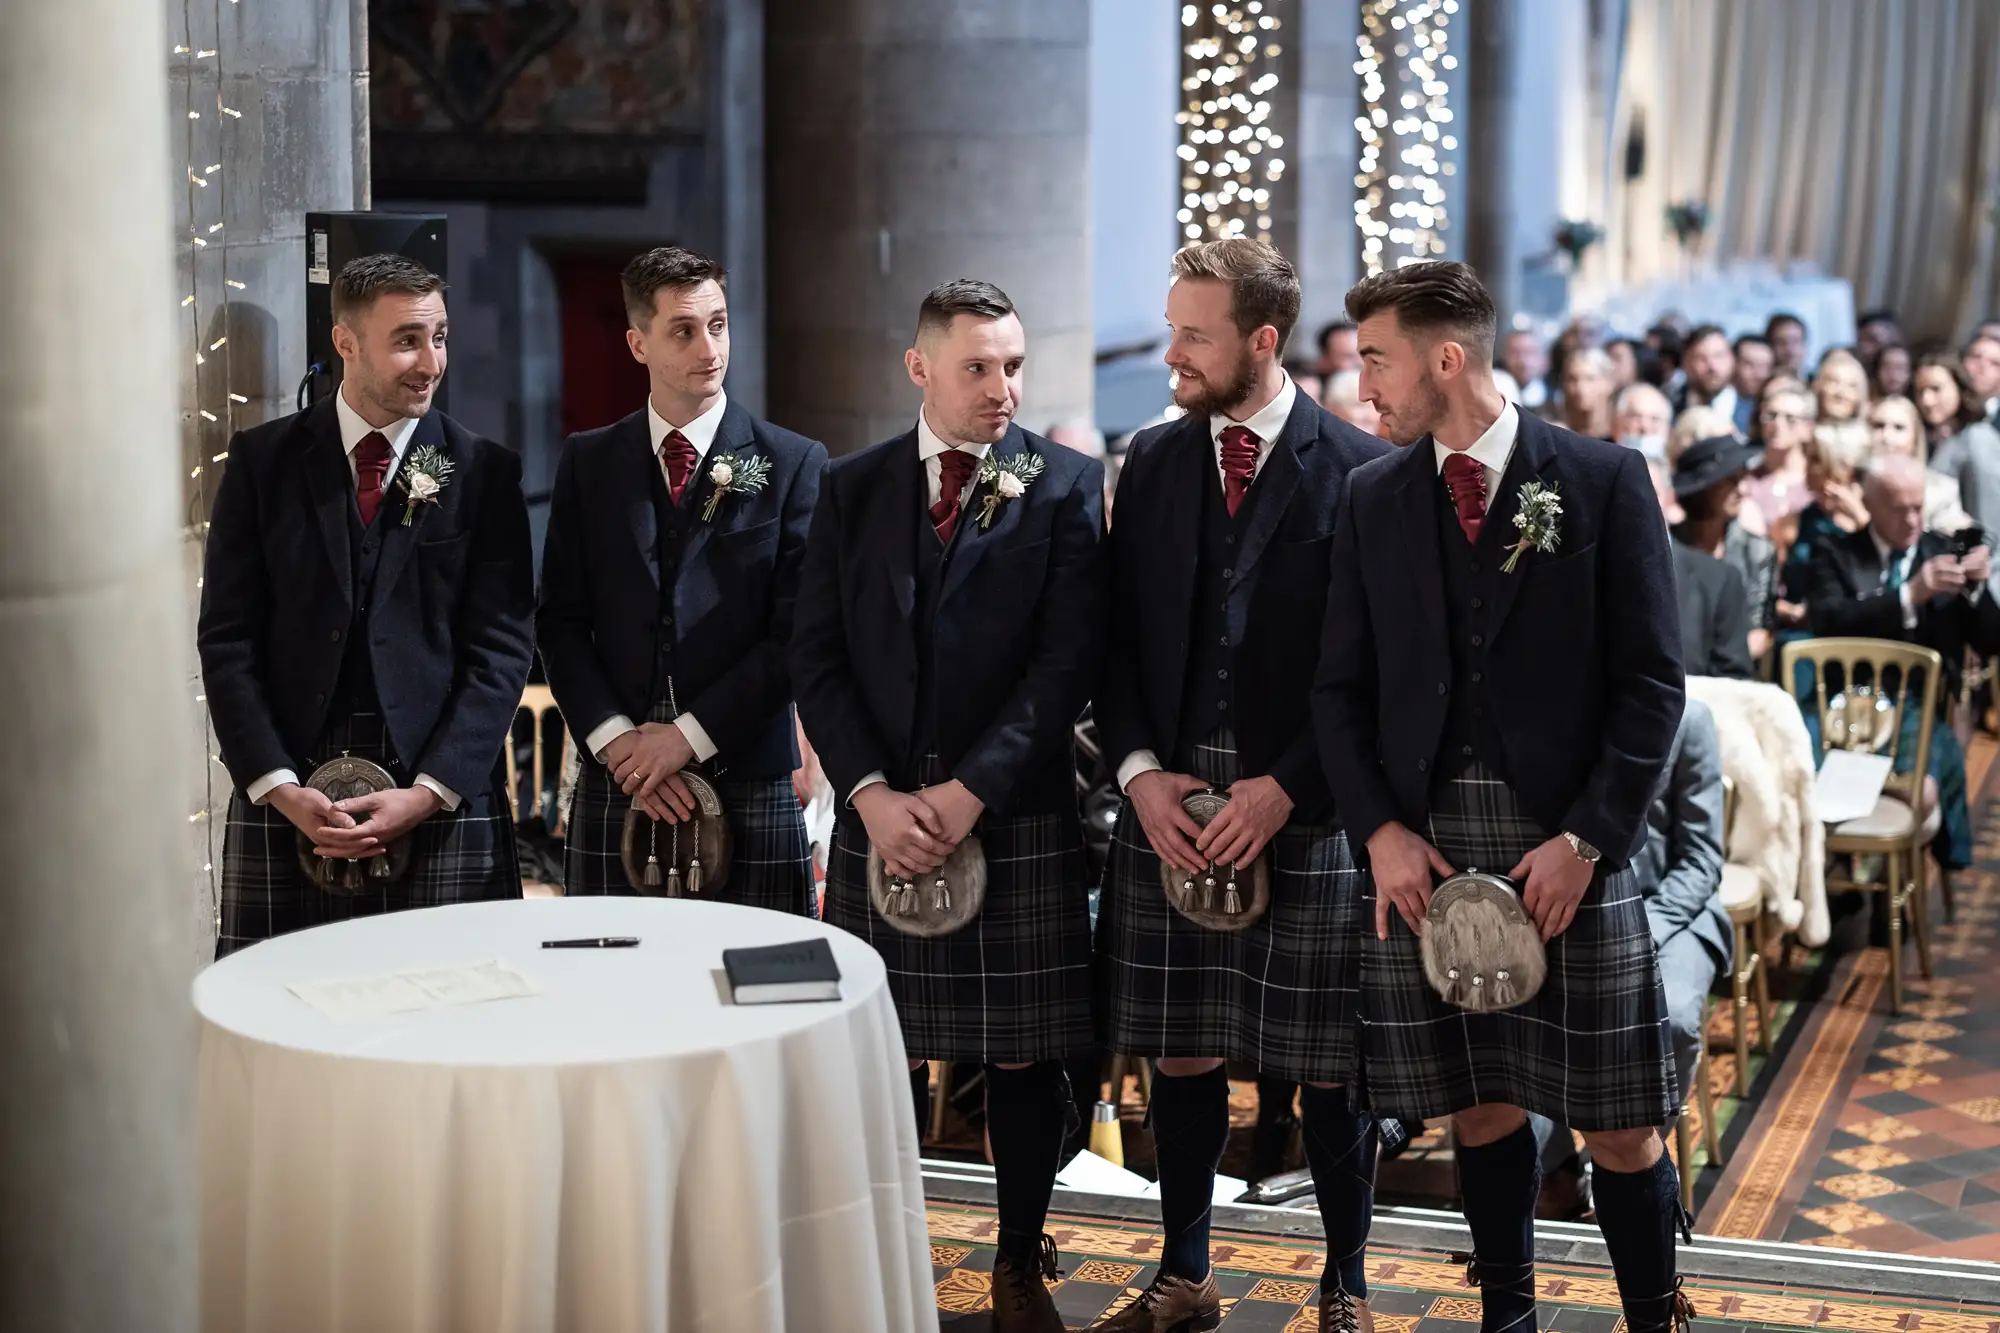 Five groomsmen in kilts standing in a church during a wedding ceremony, with guests seated in the background.